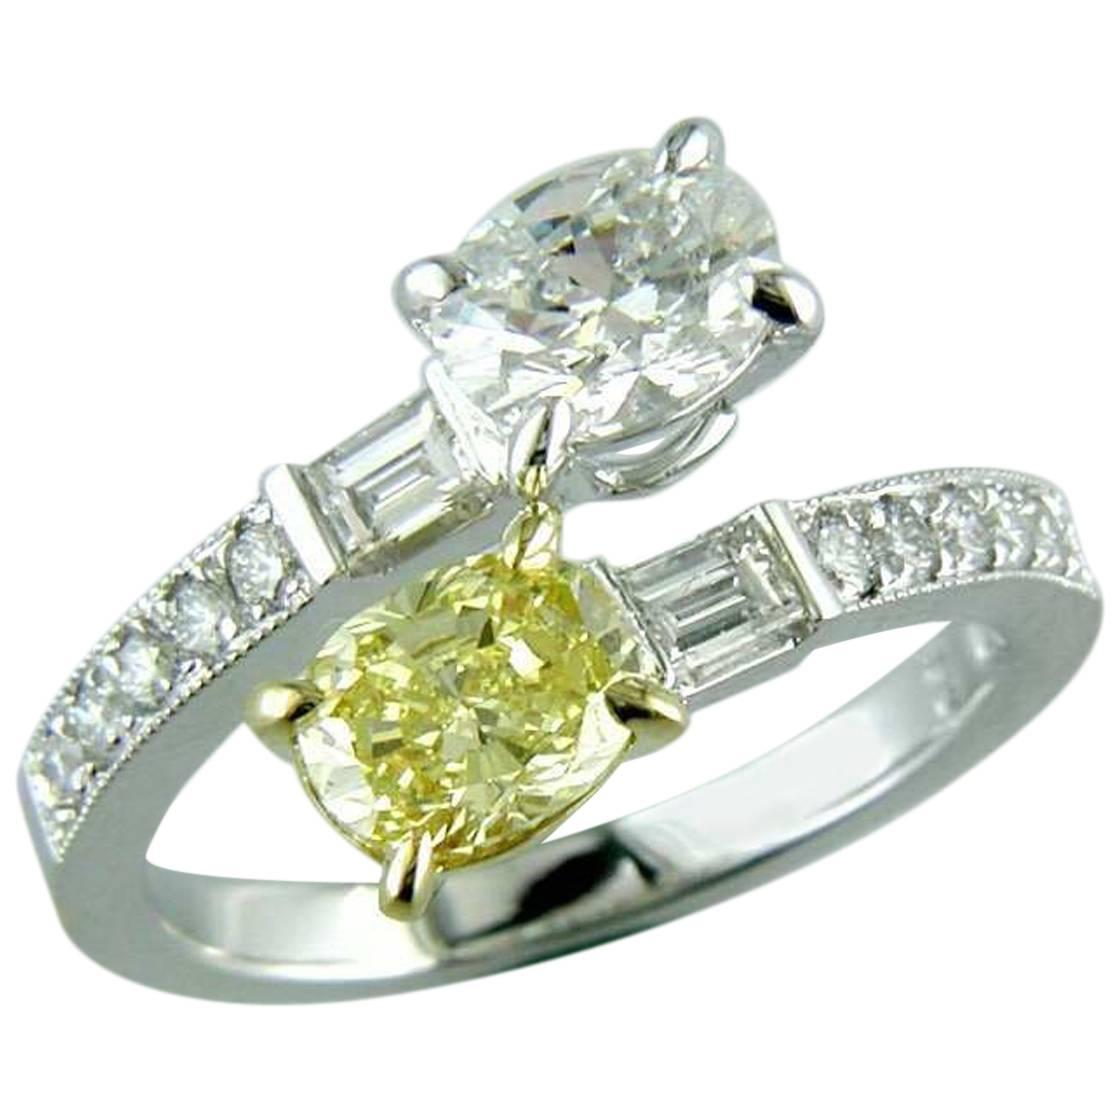 One Fancy Platinum Swirl Yellow and White Oval Diamond Ring For Sale